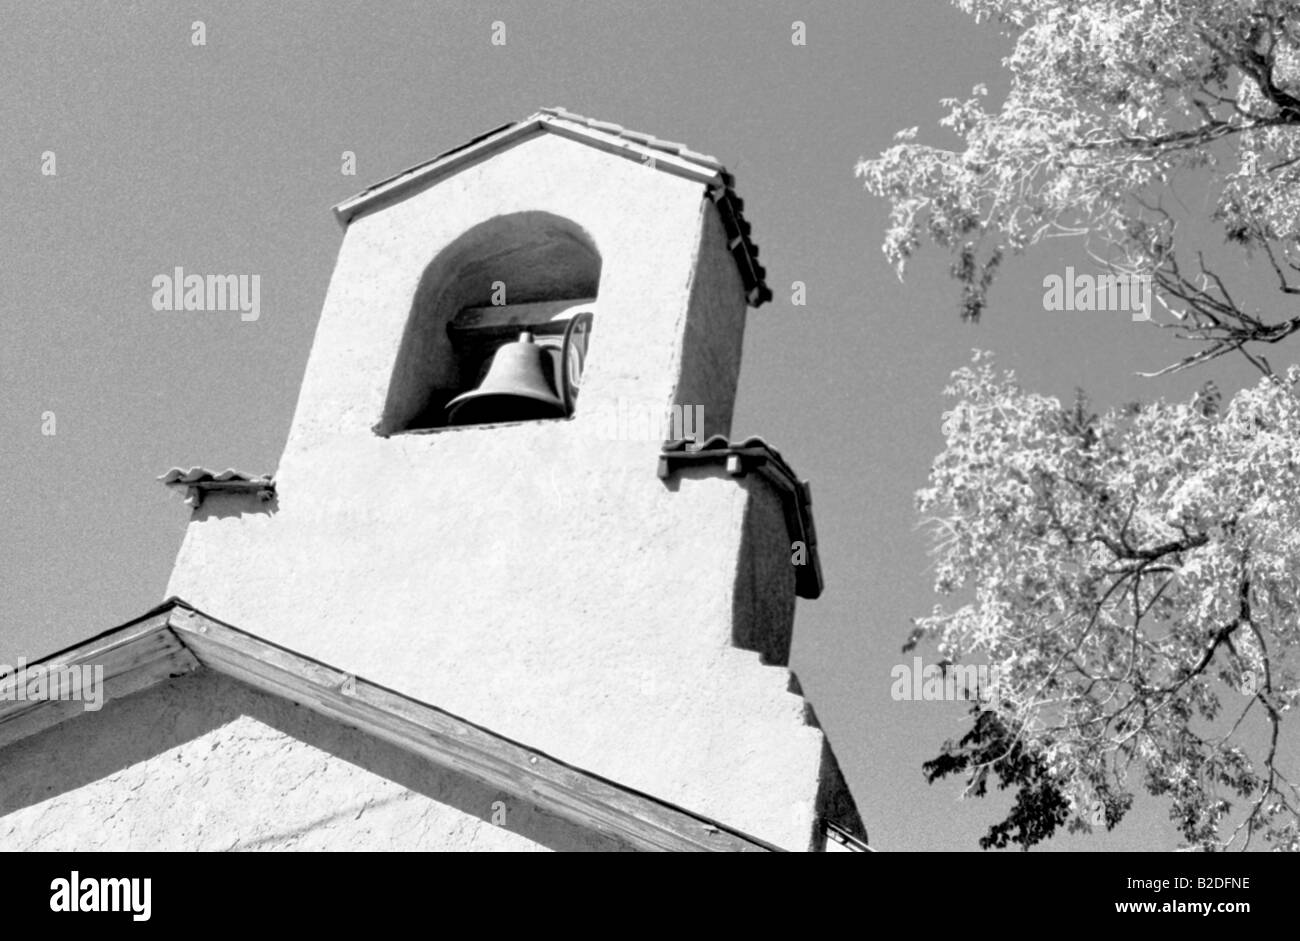 Old Mission Church Bell Tower Steeple Stock Photo